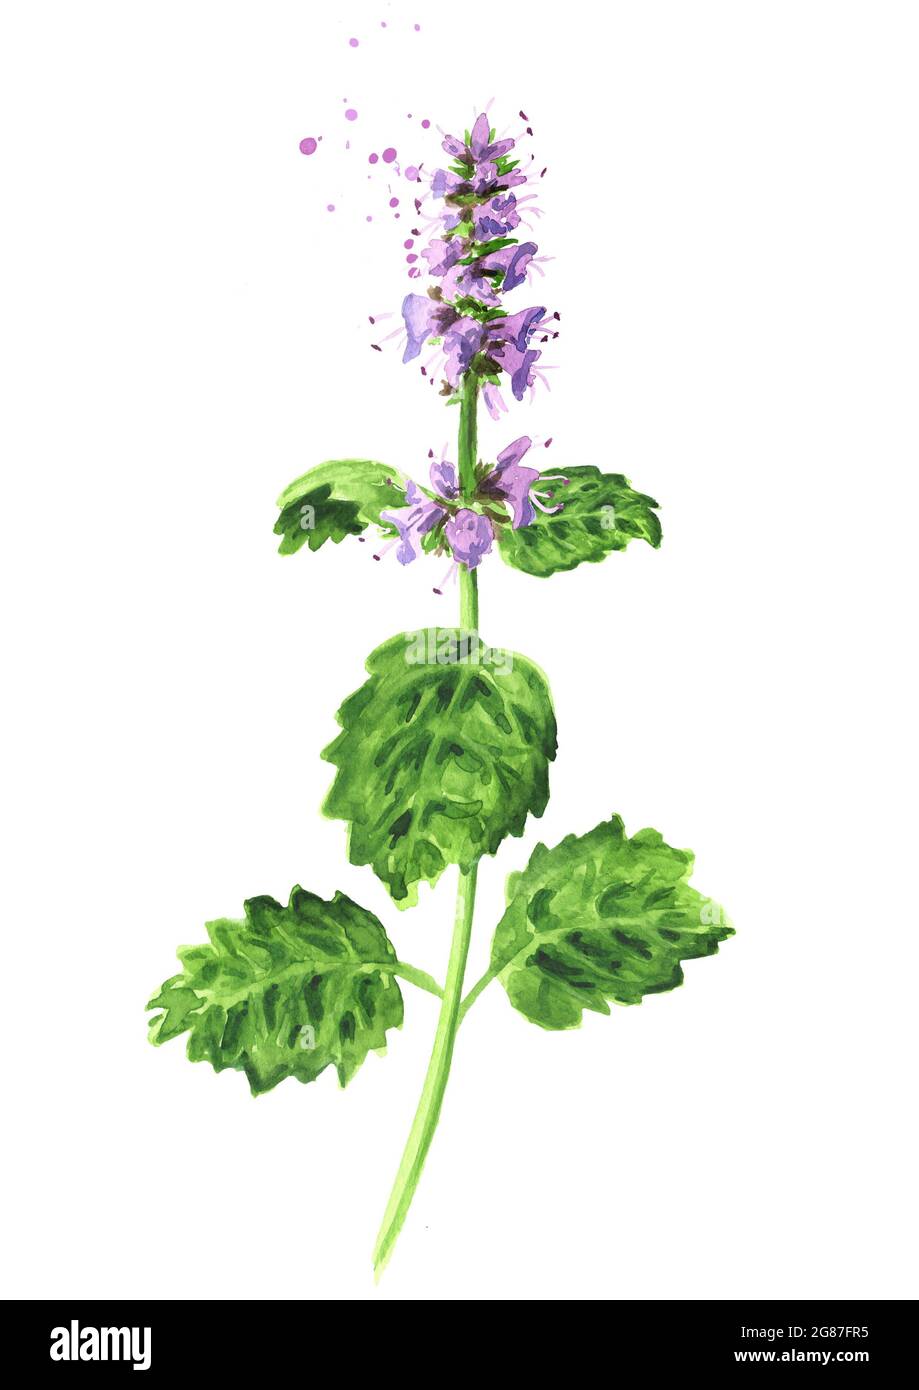 Plant patchouli or Pogostemon cablini branch with flowers and leaves. Hand drawn watercolor illustration, isolated on white background Stock Photo